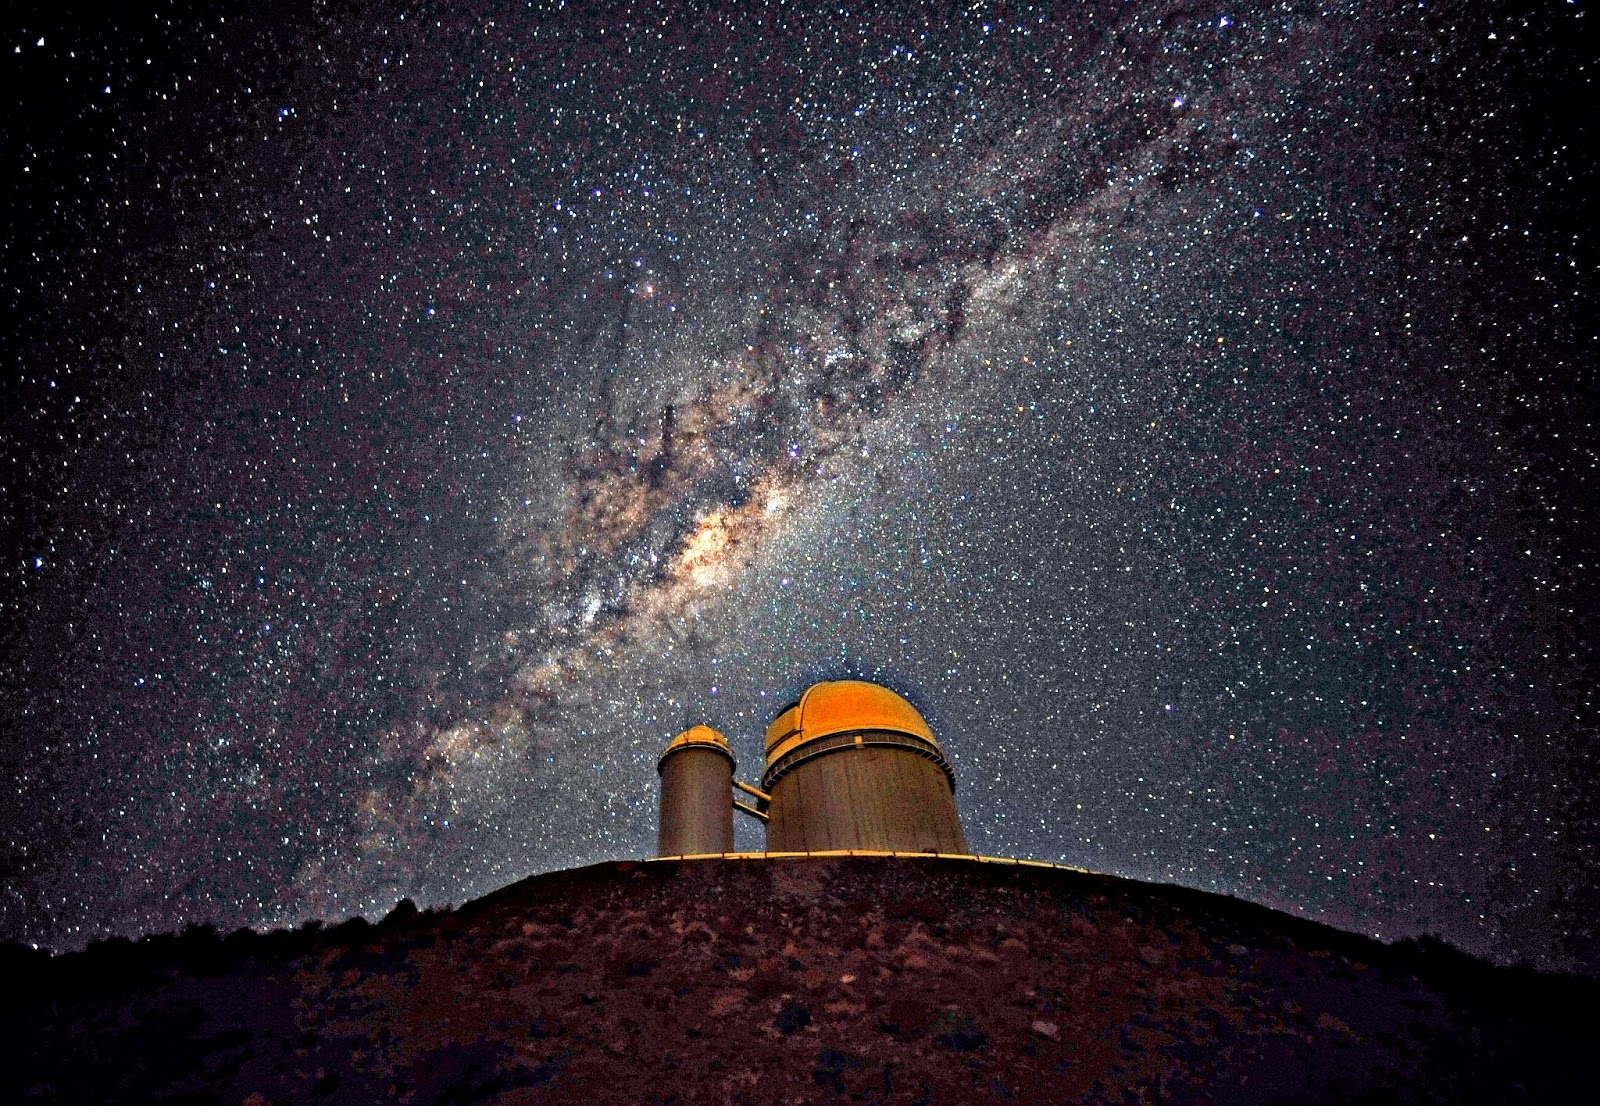 View of the Milky Way disk from Earth